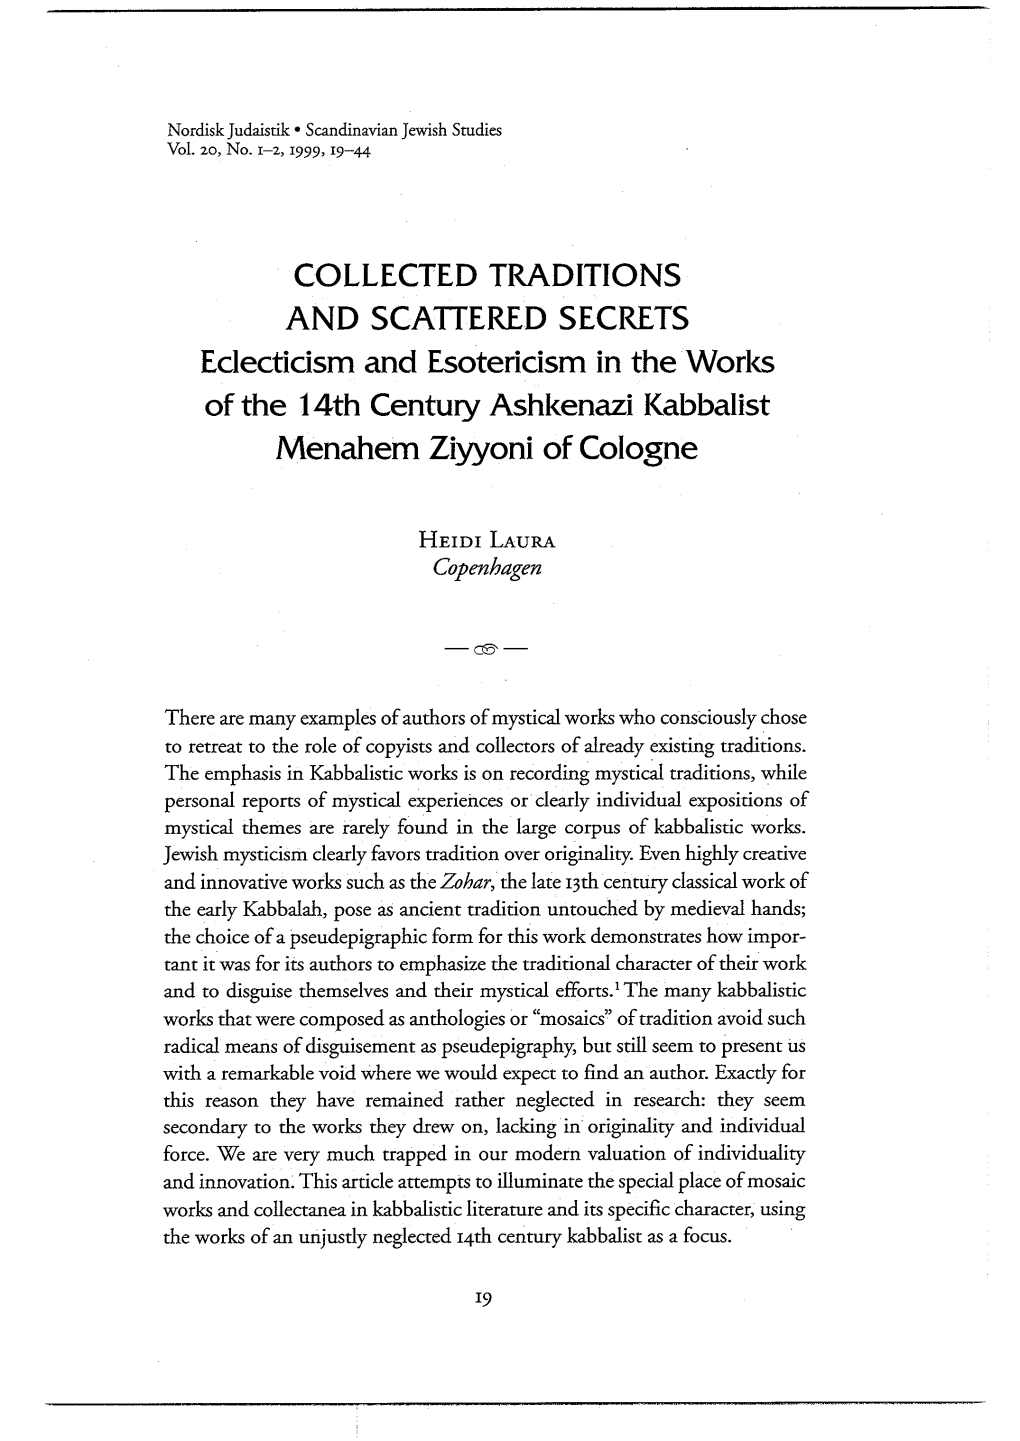 COLLECTED TRADITIONS and SCATTERED SECRETS Eclecticism and Esotericism in the Works of the 14Th Century Ashkenazi Kabbalist Menahem Ziyyoni of Cologne